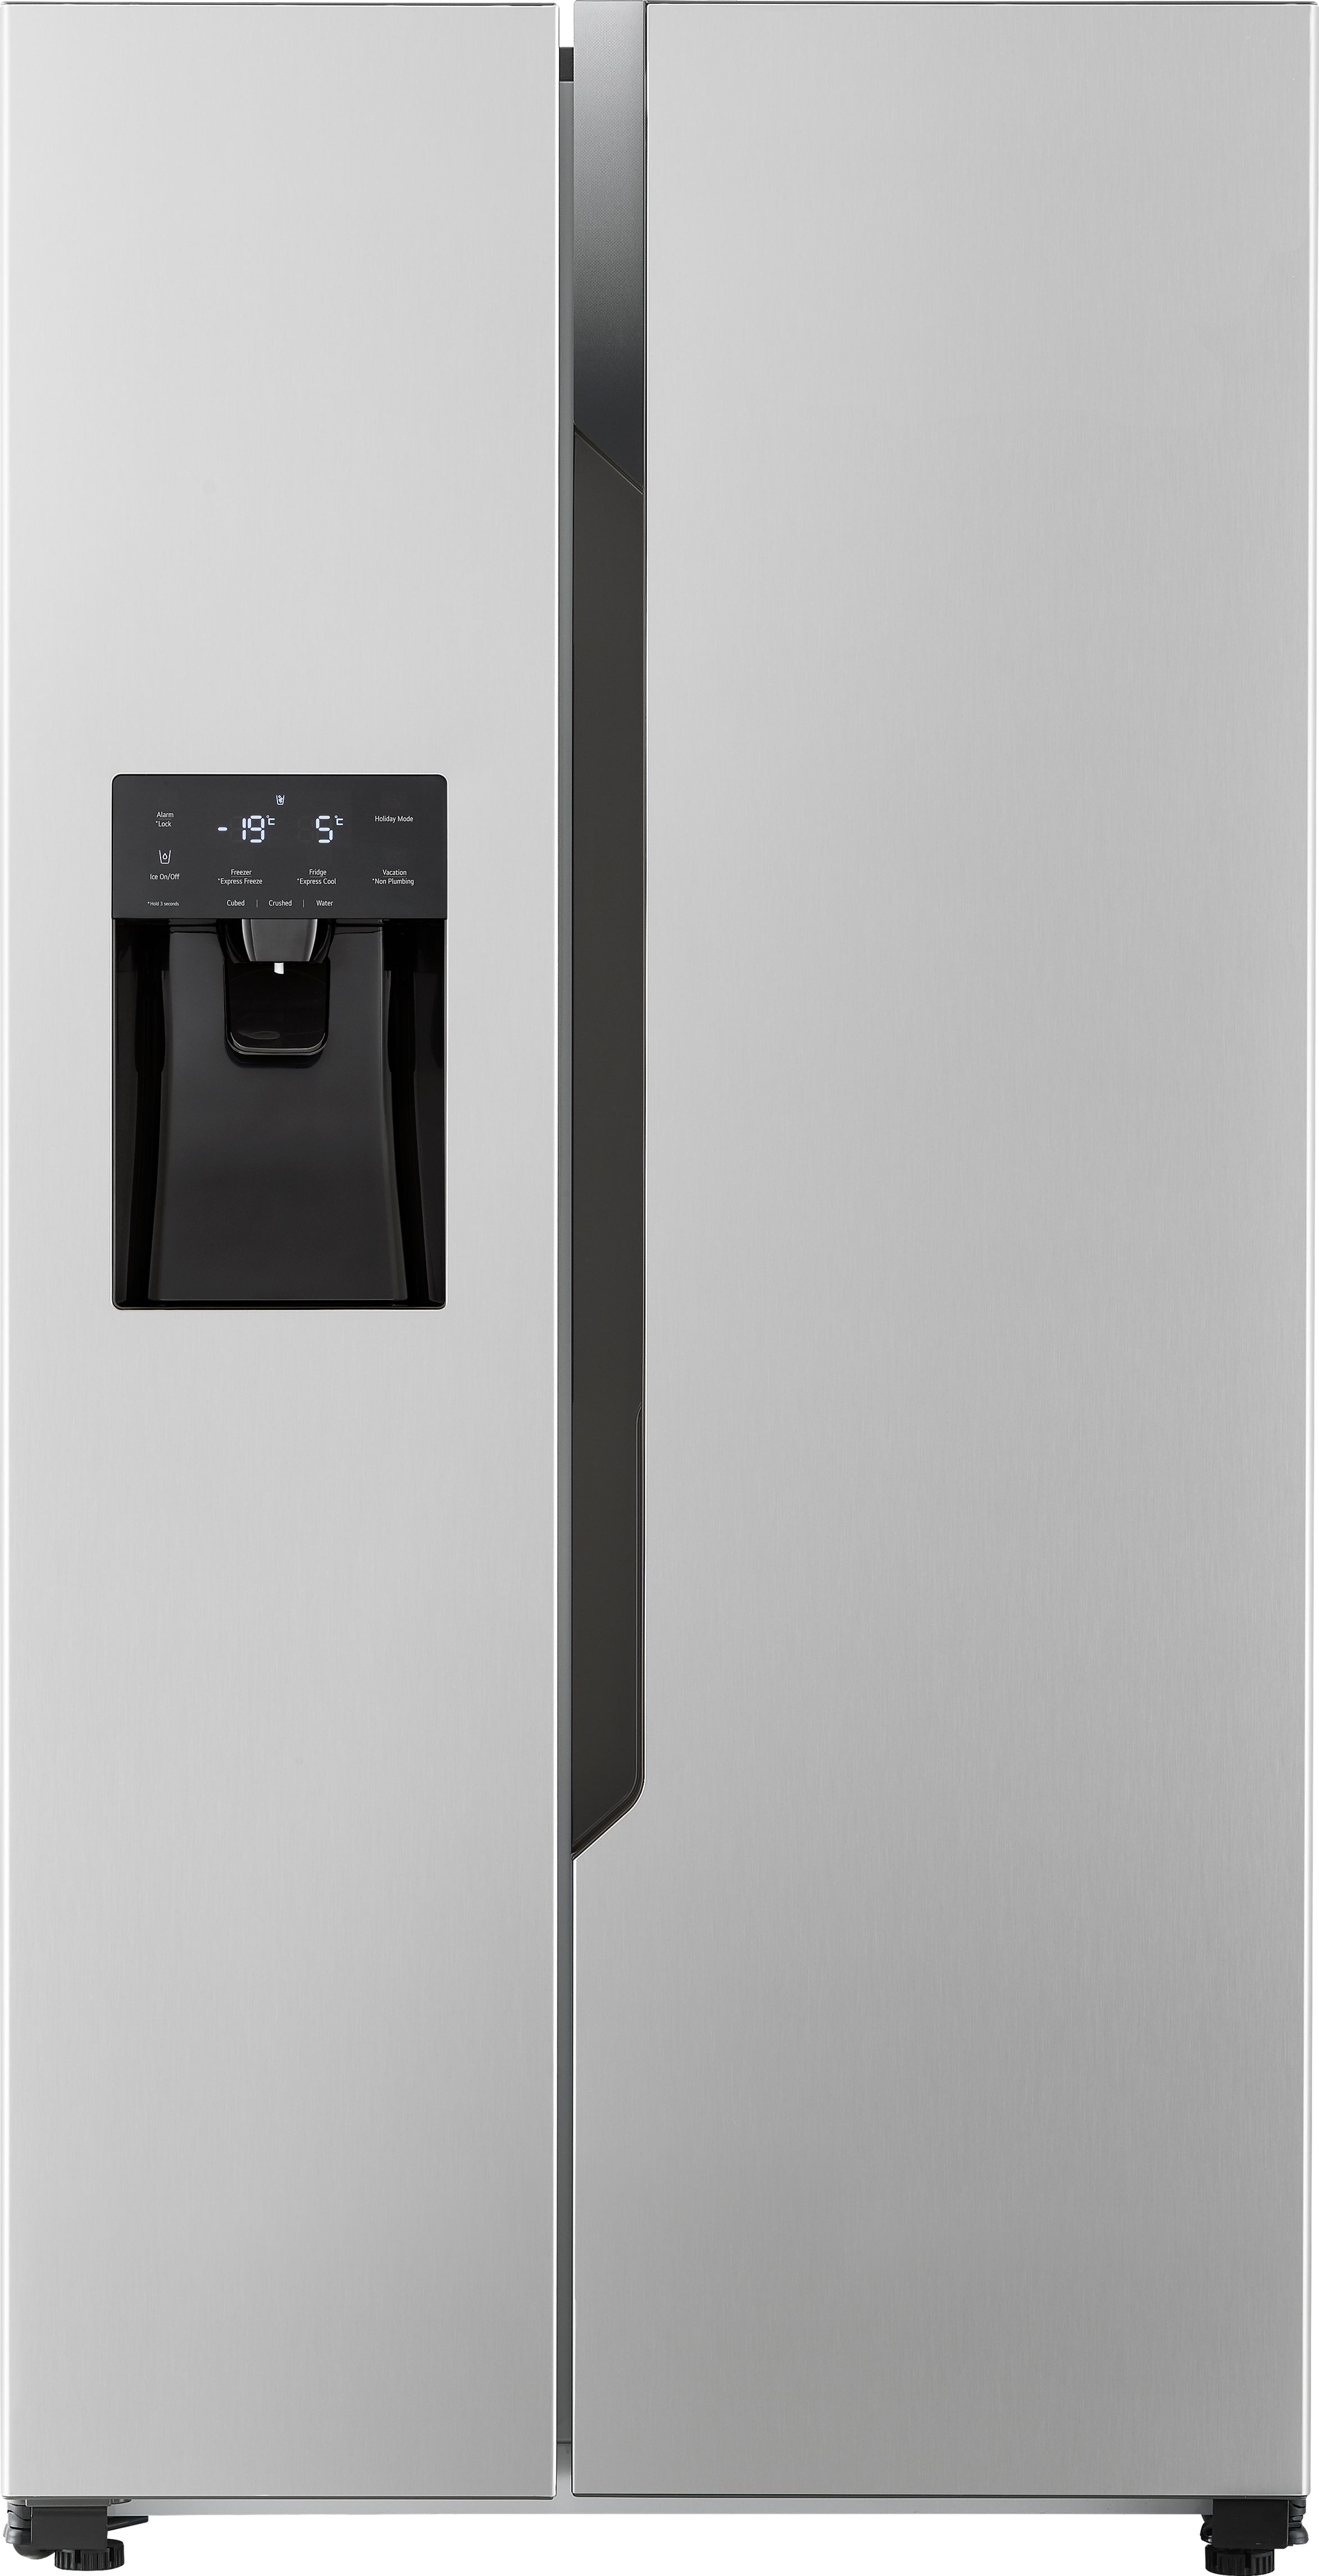 LG GSM32HSBEH Non-Plumbed Total No Frost American Fridge Freezer - Silver - E Rated, Silver